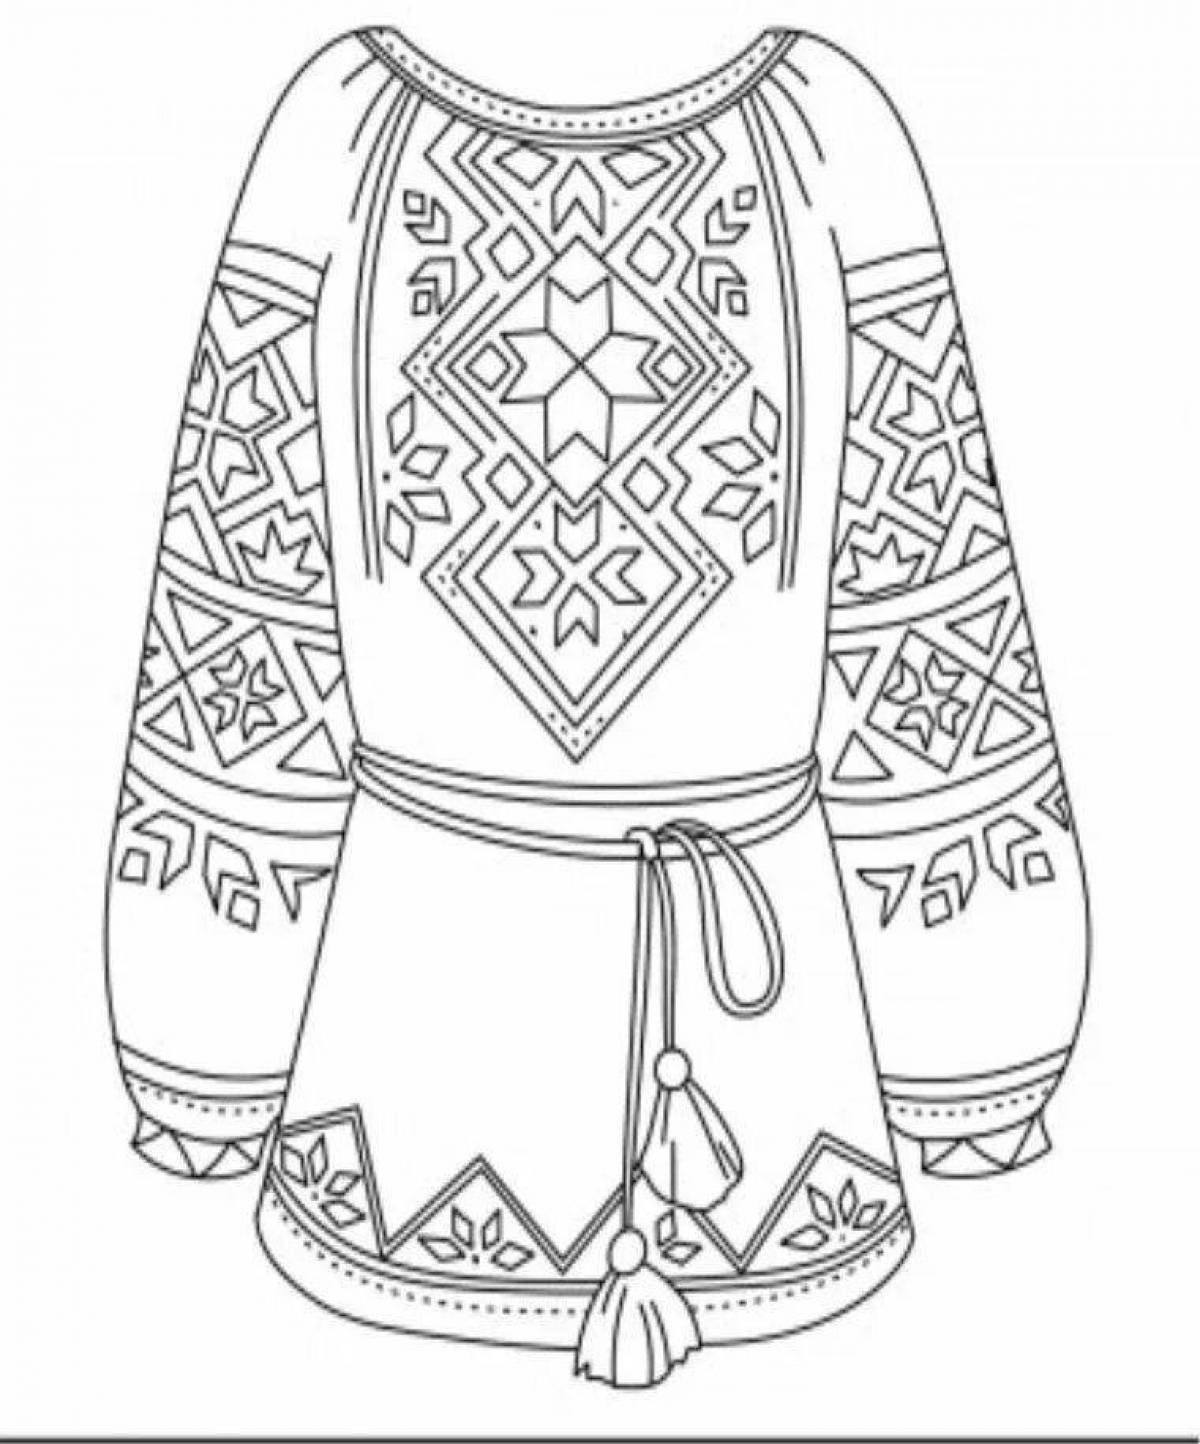 Coloring page spectacular belarusian ornament